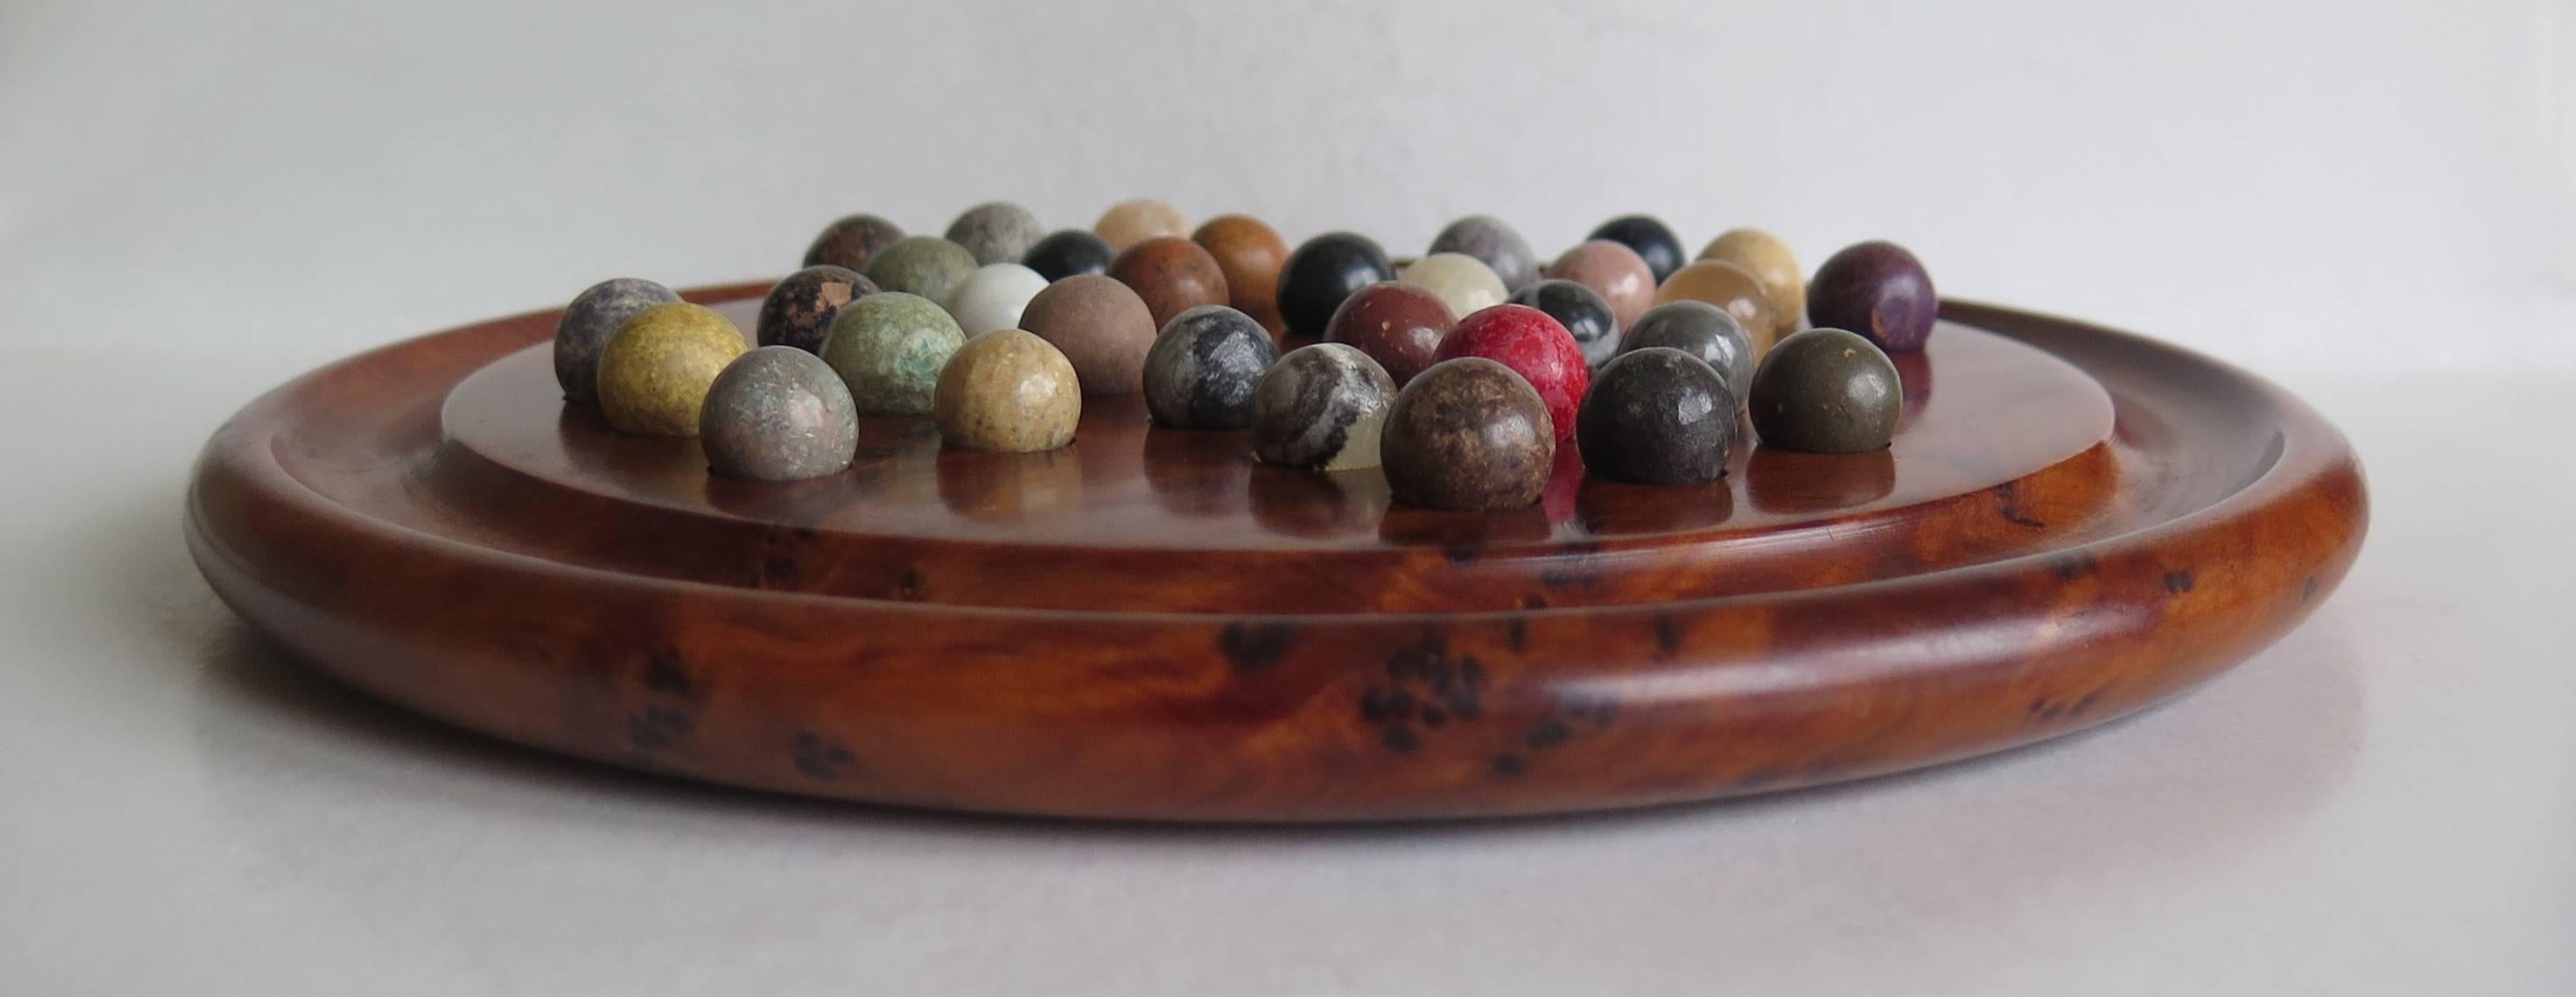 marbles board game